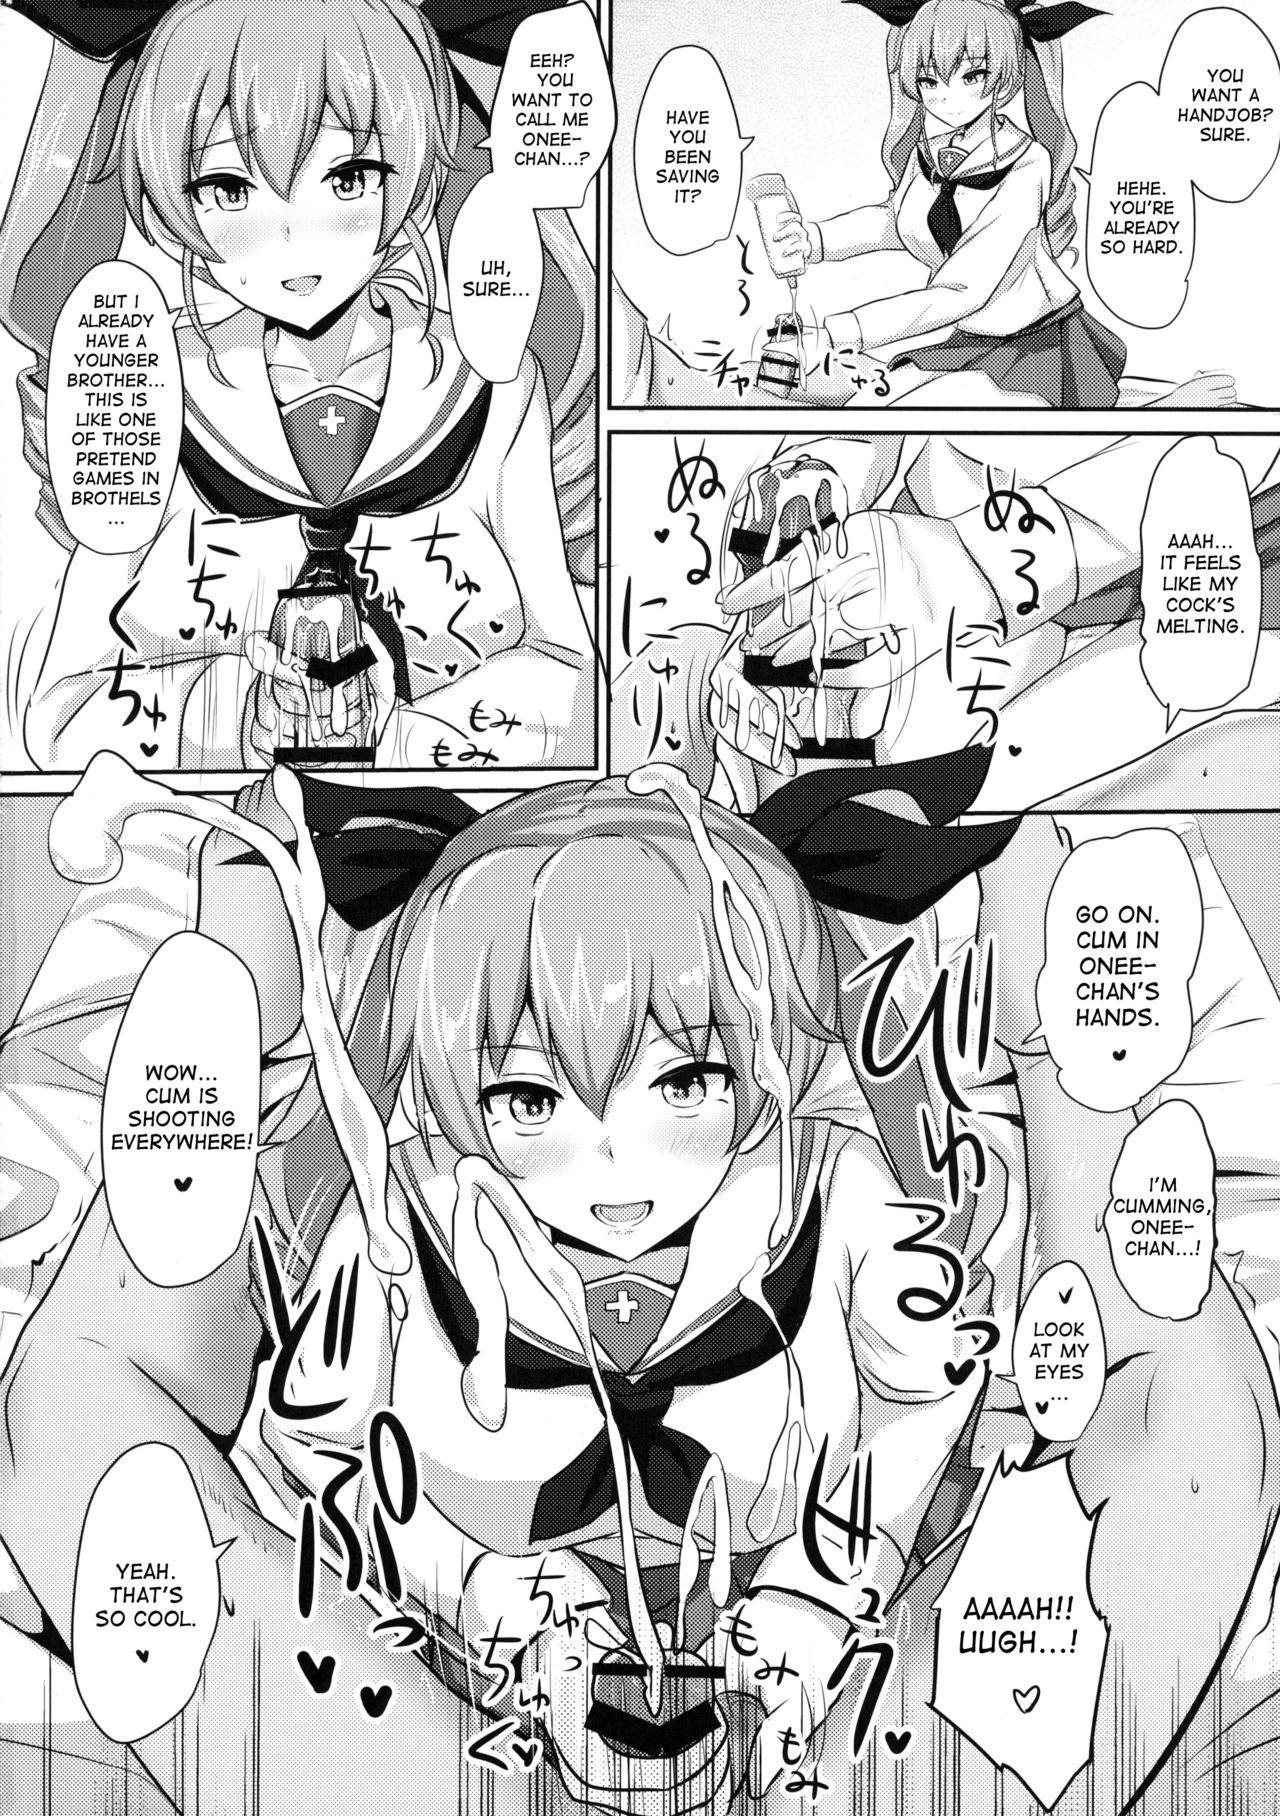 Cumload Anchovy Nee-san White Sauce Zoe - Girls und panzer Group - Page 5